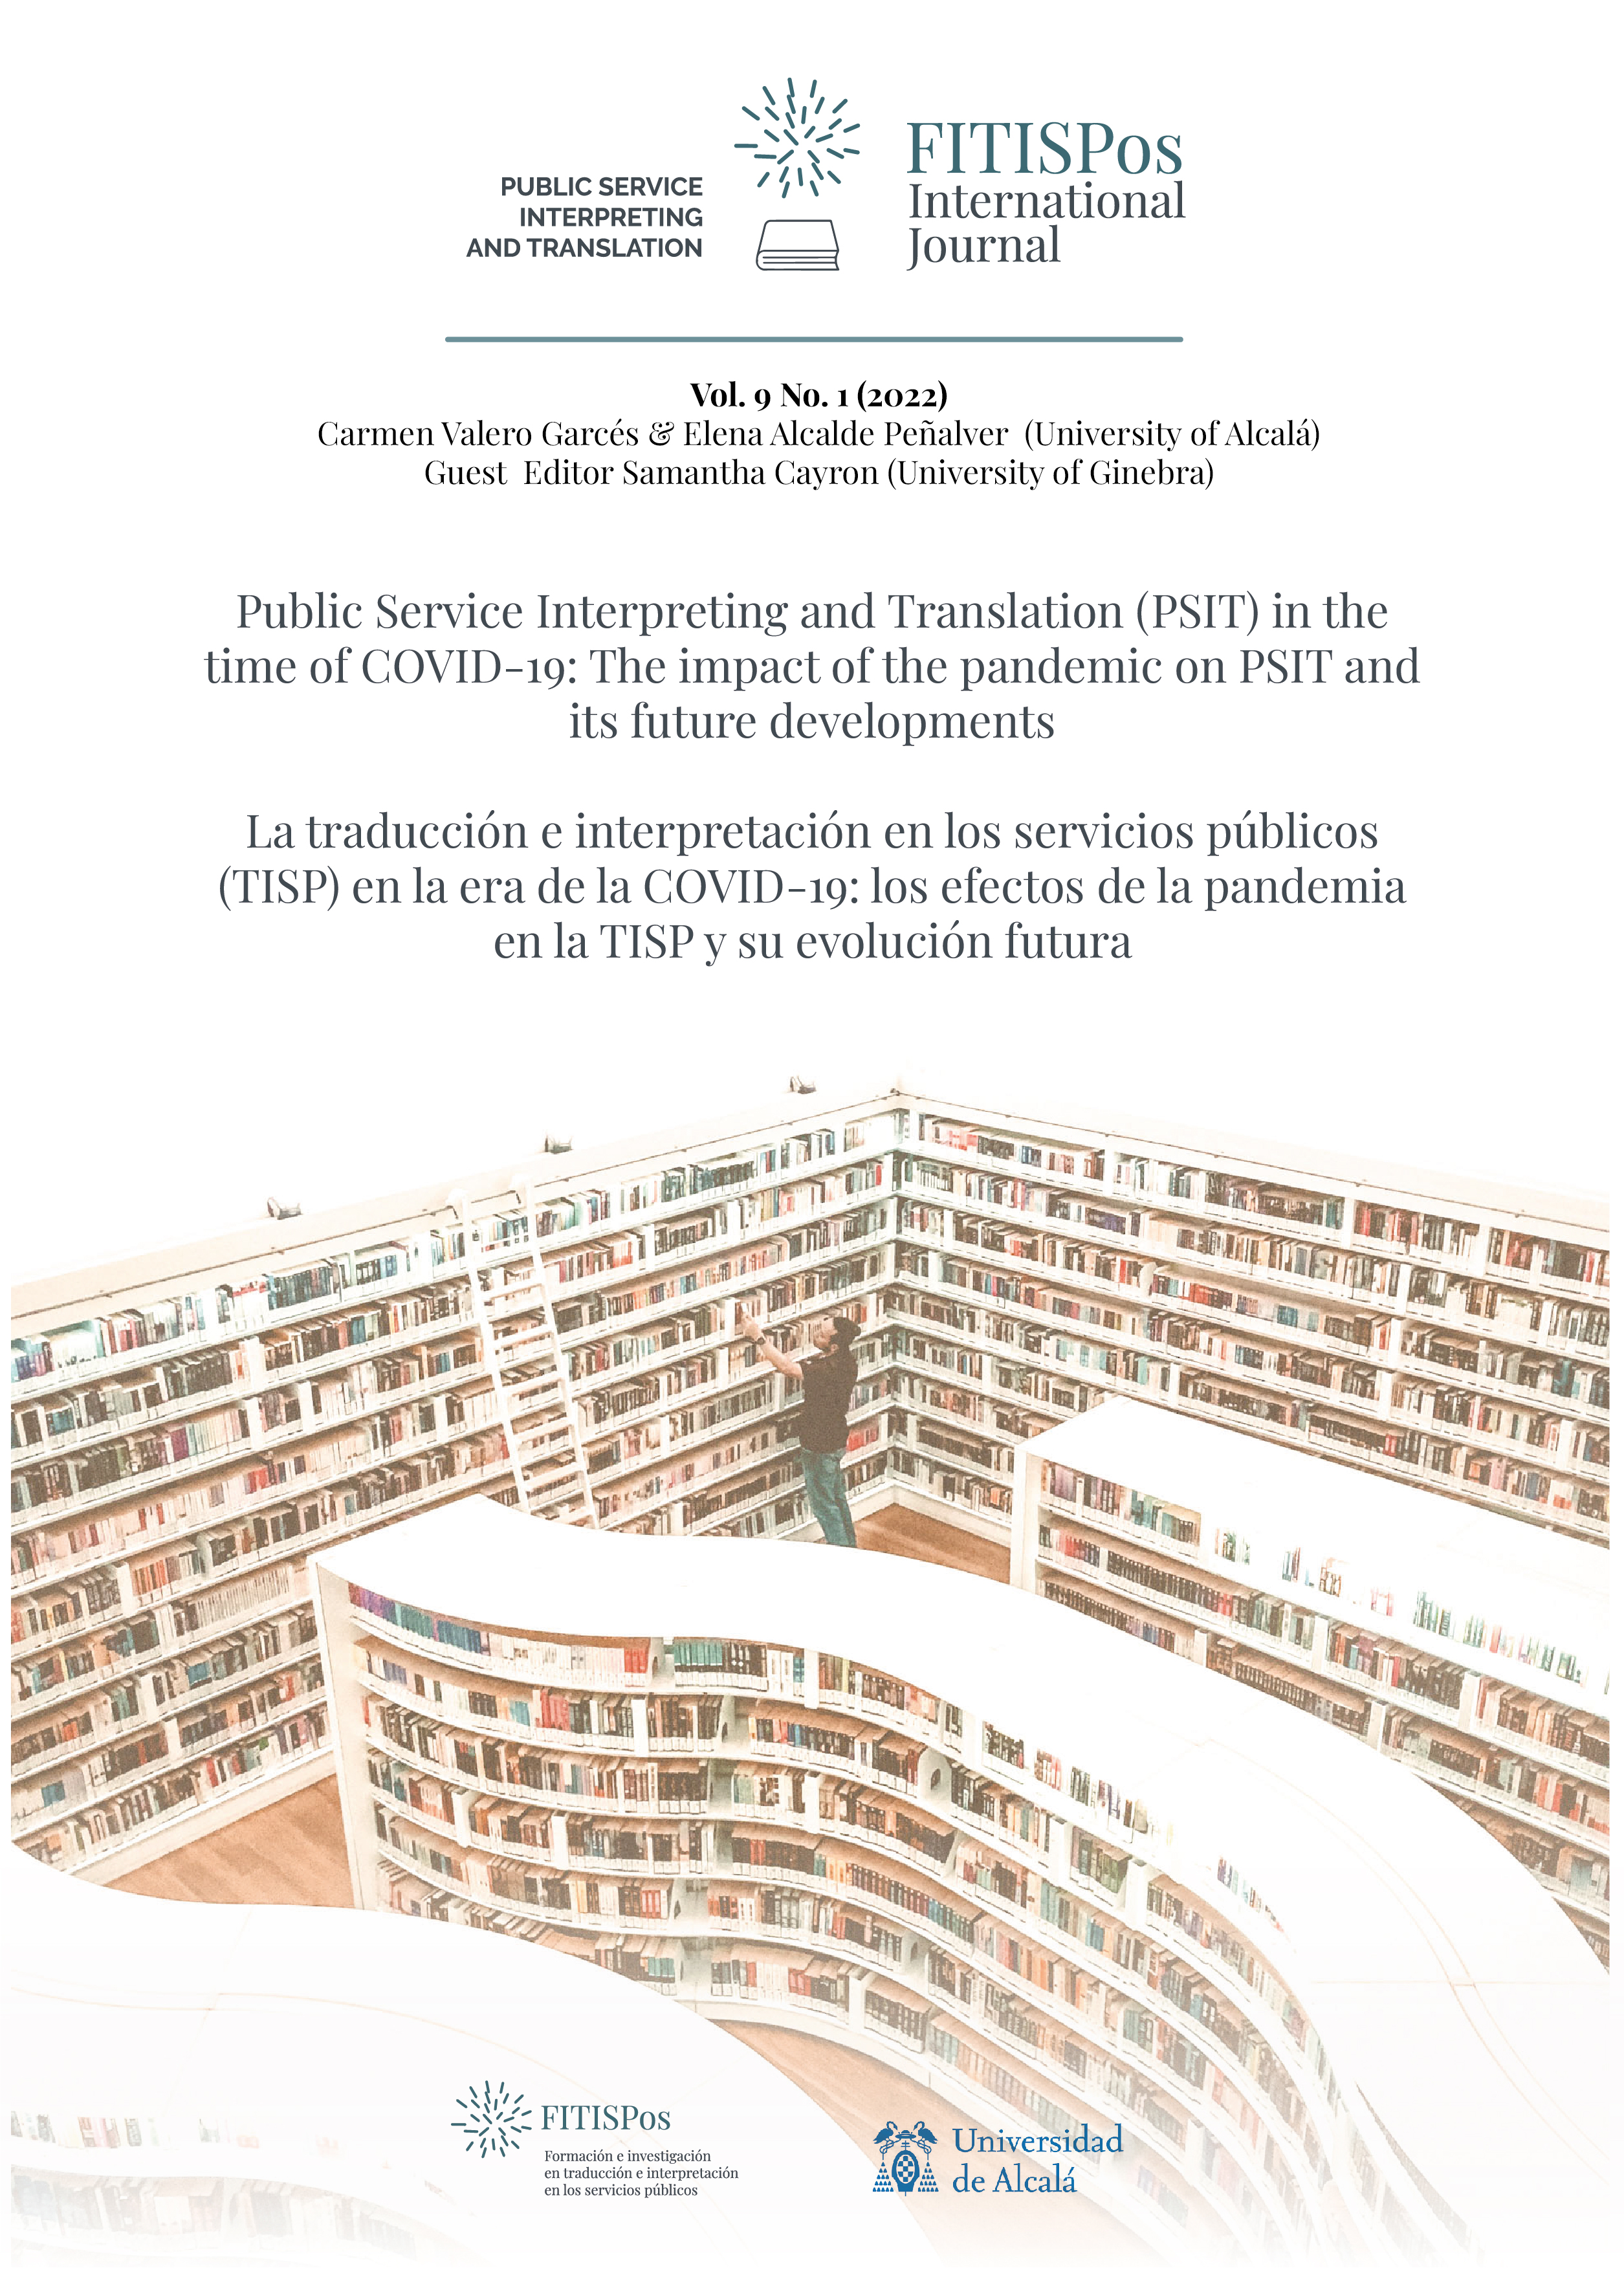 					View Vol. 9 No. 1 (2022): The impact of the COVID-19 pandemic on Public Service Interpreting and Translation (PSIT) and its future developments
				